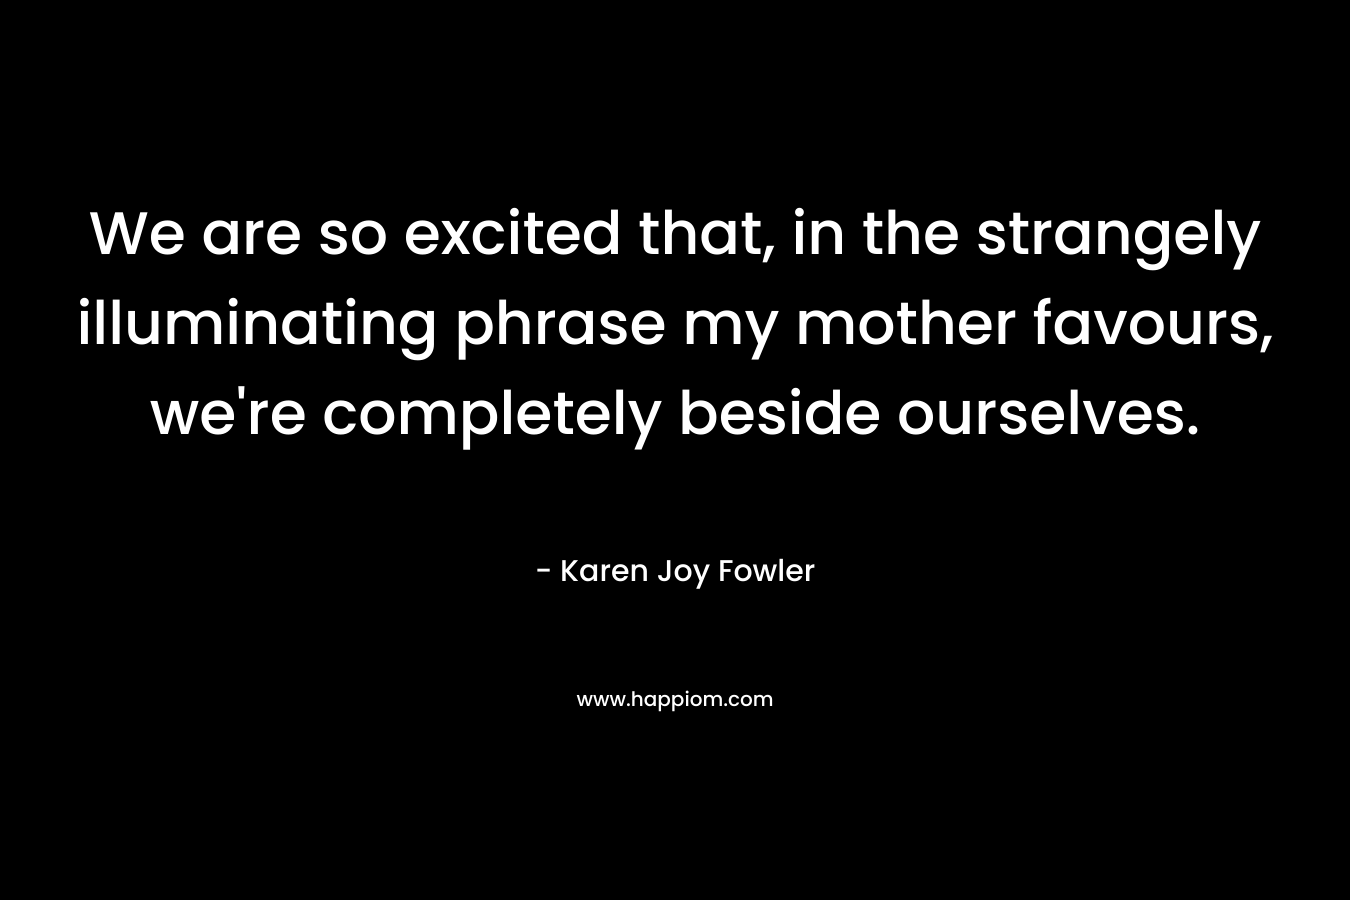 We are so excited that, in the strangely illuminating phrase my mother favours, we’re completely beside ourselves. – Karen Joy Fowler